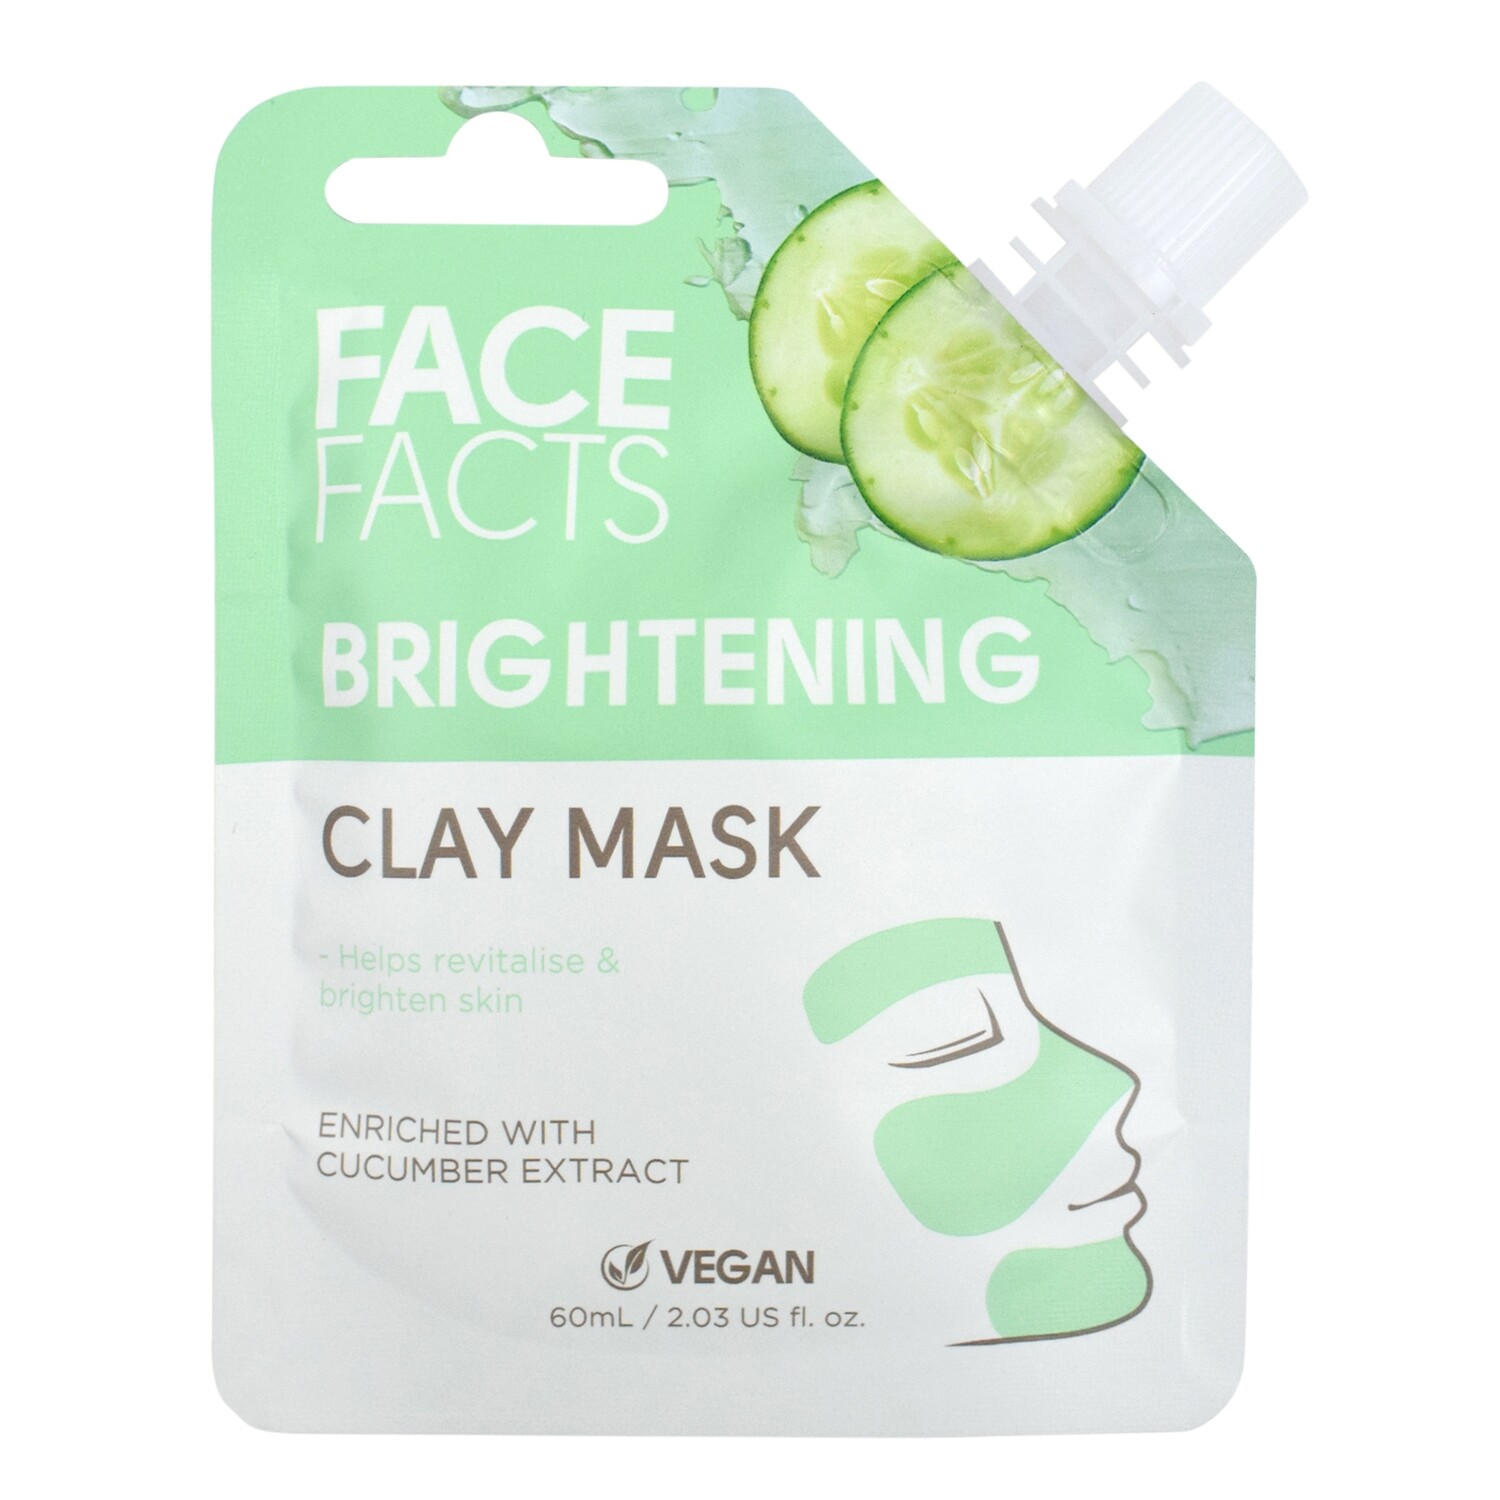 Face Facts Mud Mask (Clay) - Brightening, 60ml